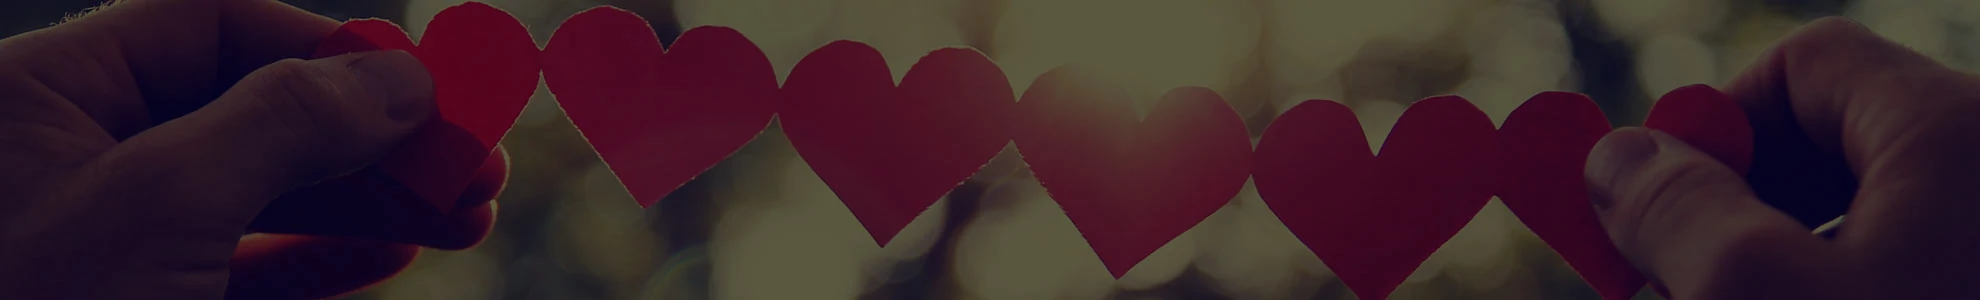 Background image of person holding up string of paper hearts